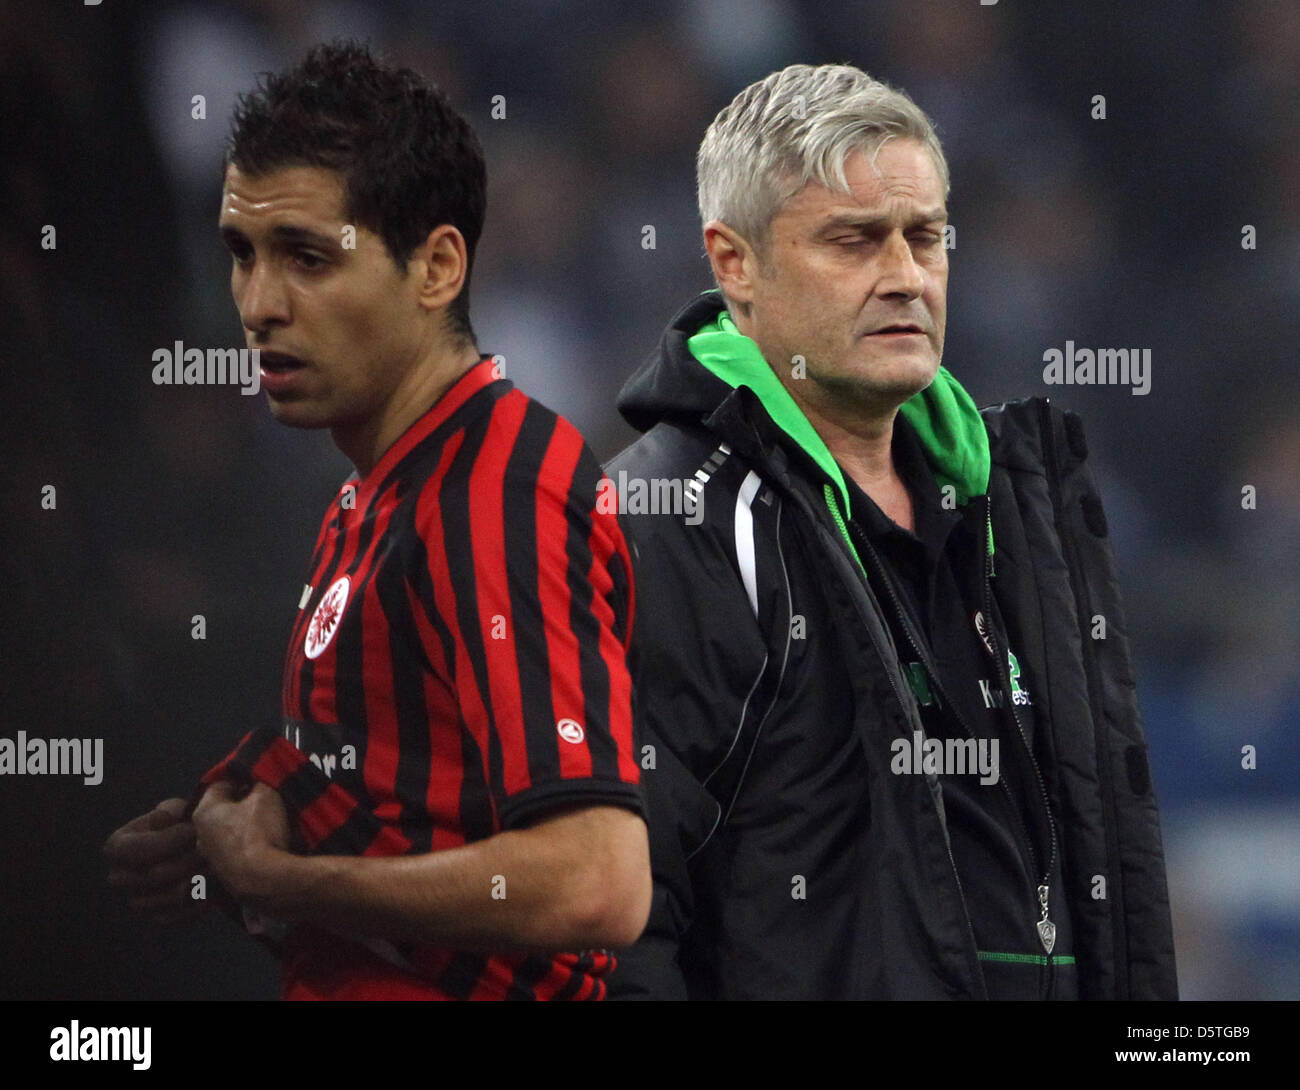 Frankfurt's head coach Armin Veh (R) closes his eyes next to his player Karim Matmour (L) after the German Bundesliga match between  FC Schalke 04 and Eintracht Frankfurt at VeltinsArena in Gelsenkirchen, Germany, 24 November 2012. Photo: FRISO GENTSCH  (ATTENTION: EMBARGO CONDITIONS! The DFL permits the further utilisation of up to 15 pictures only (no sequntial pictures or video- Stock Photo